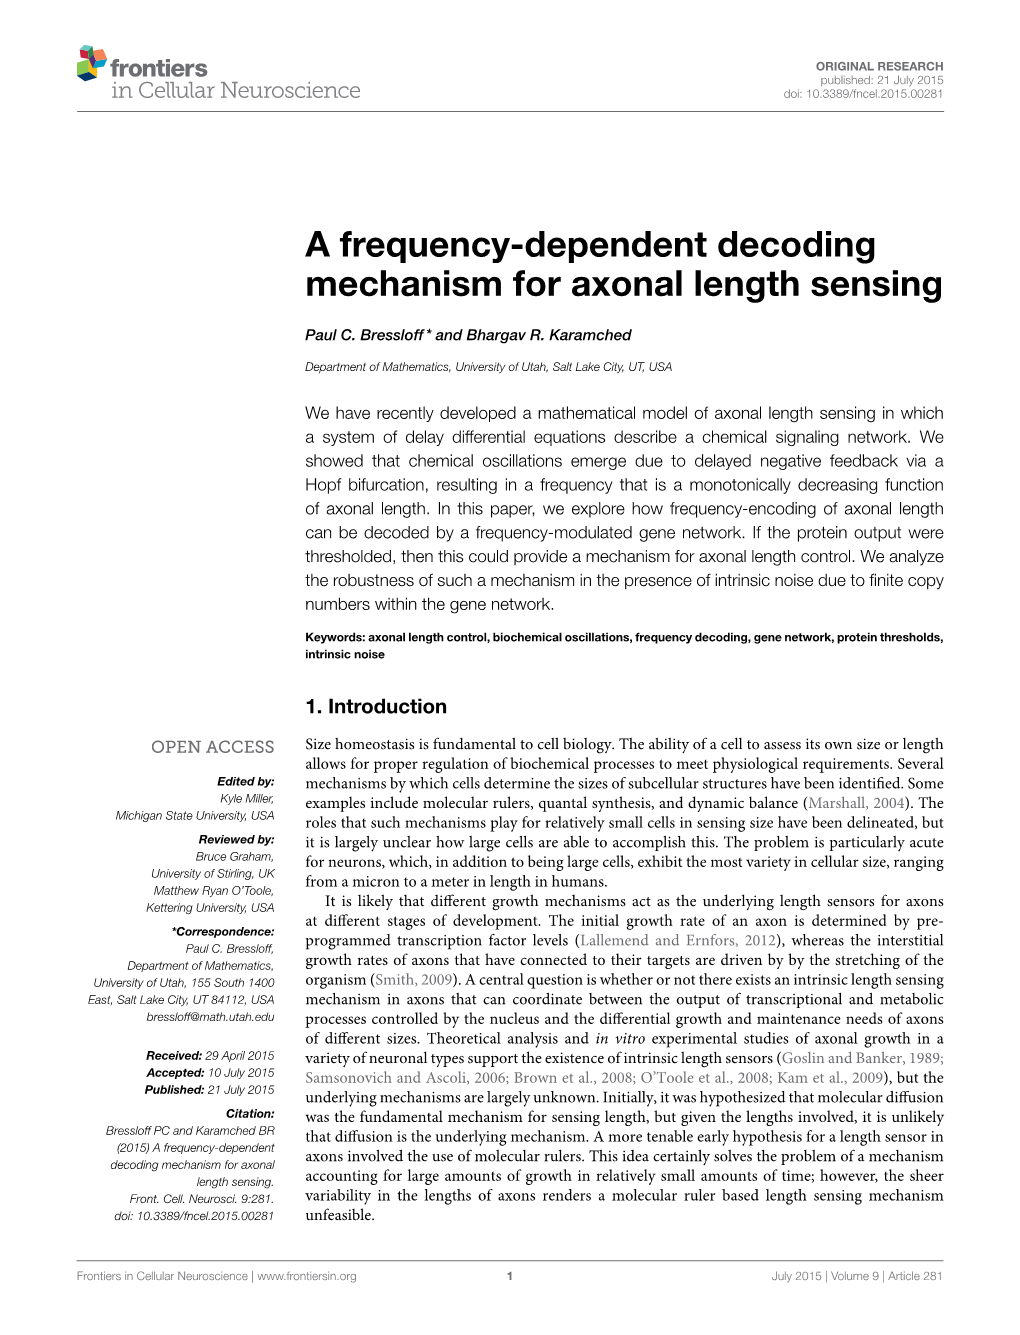 A Frequency-Dependent Decoding Mechanism for Axonal Length Sensing